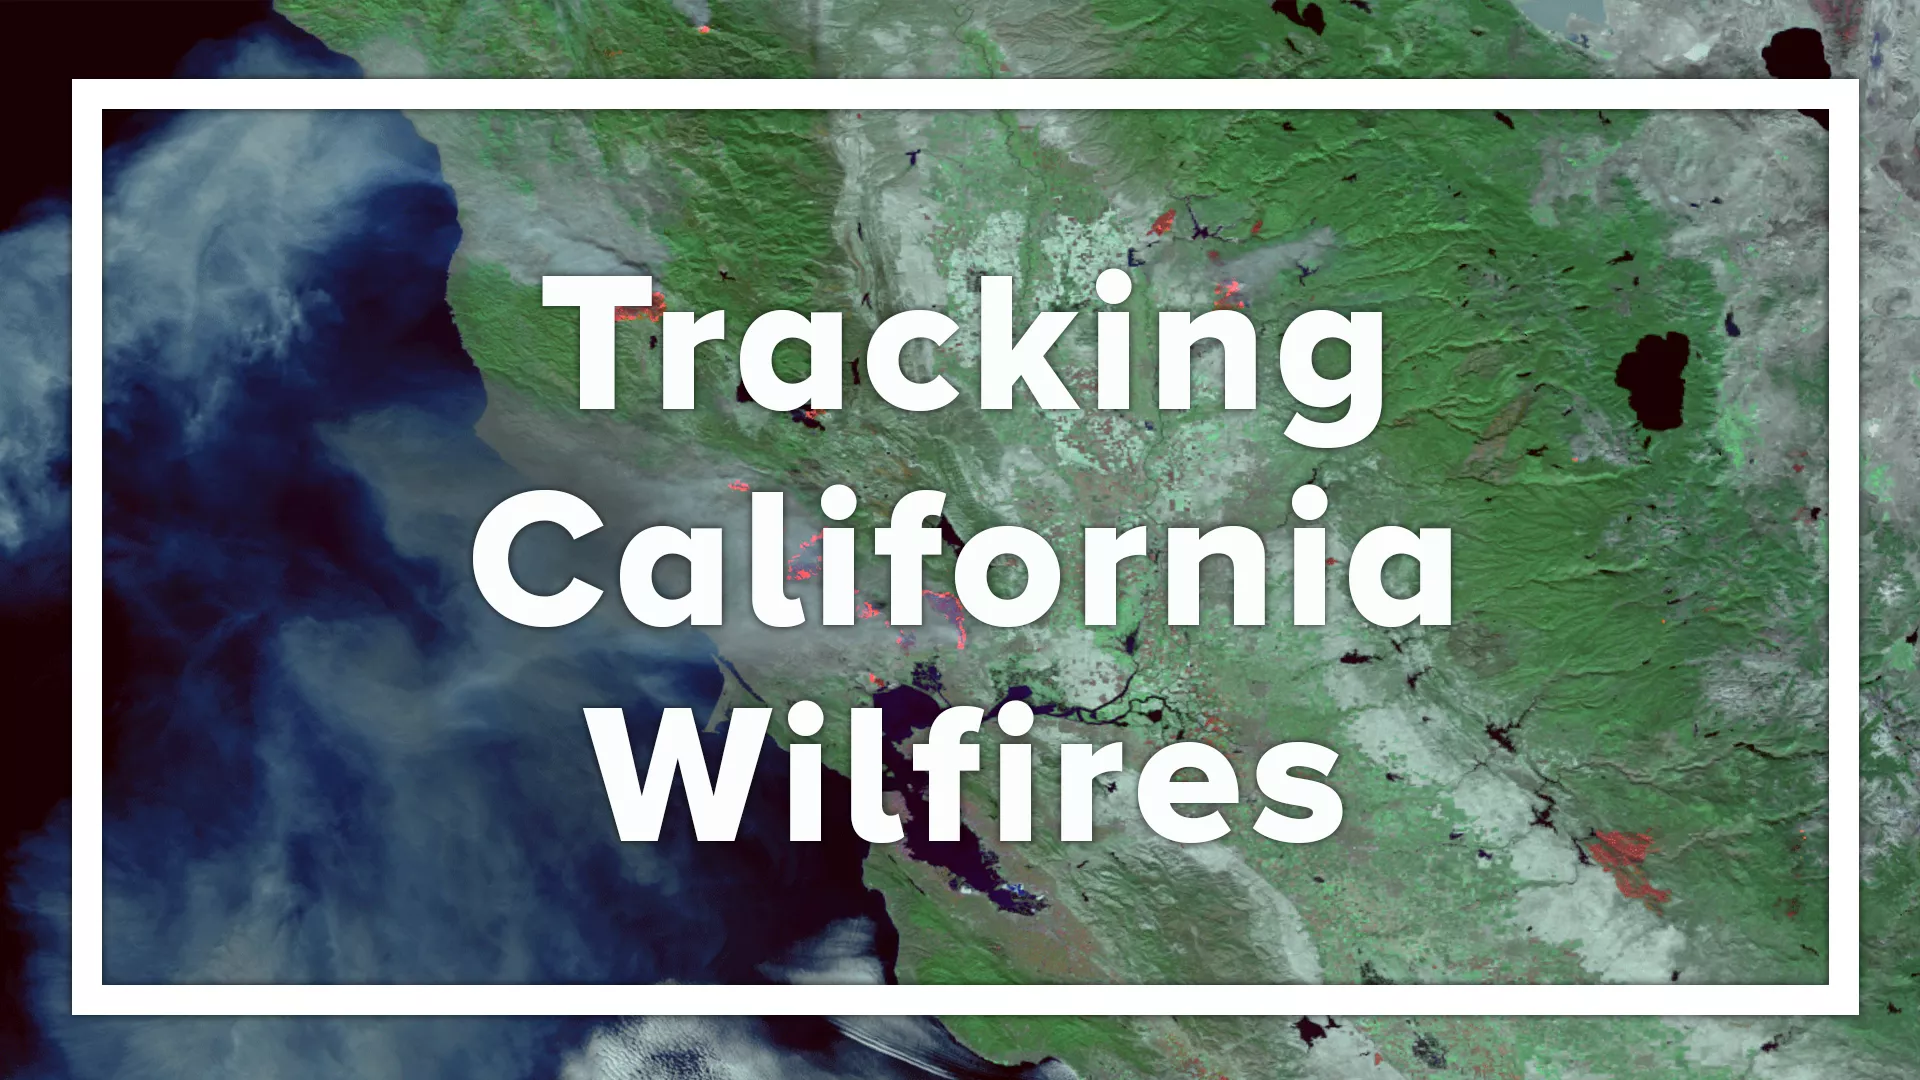 Image with text; Tracking California Wildfires